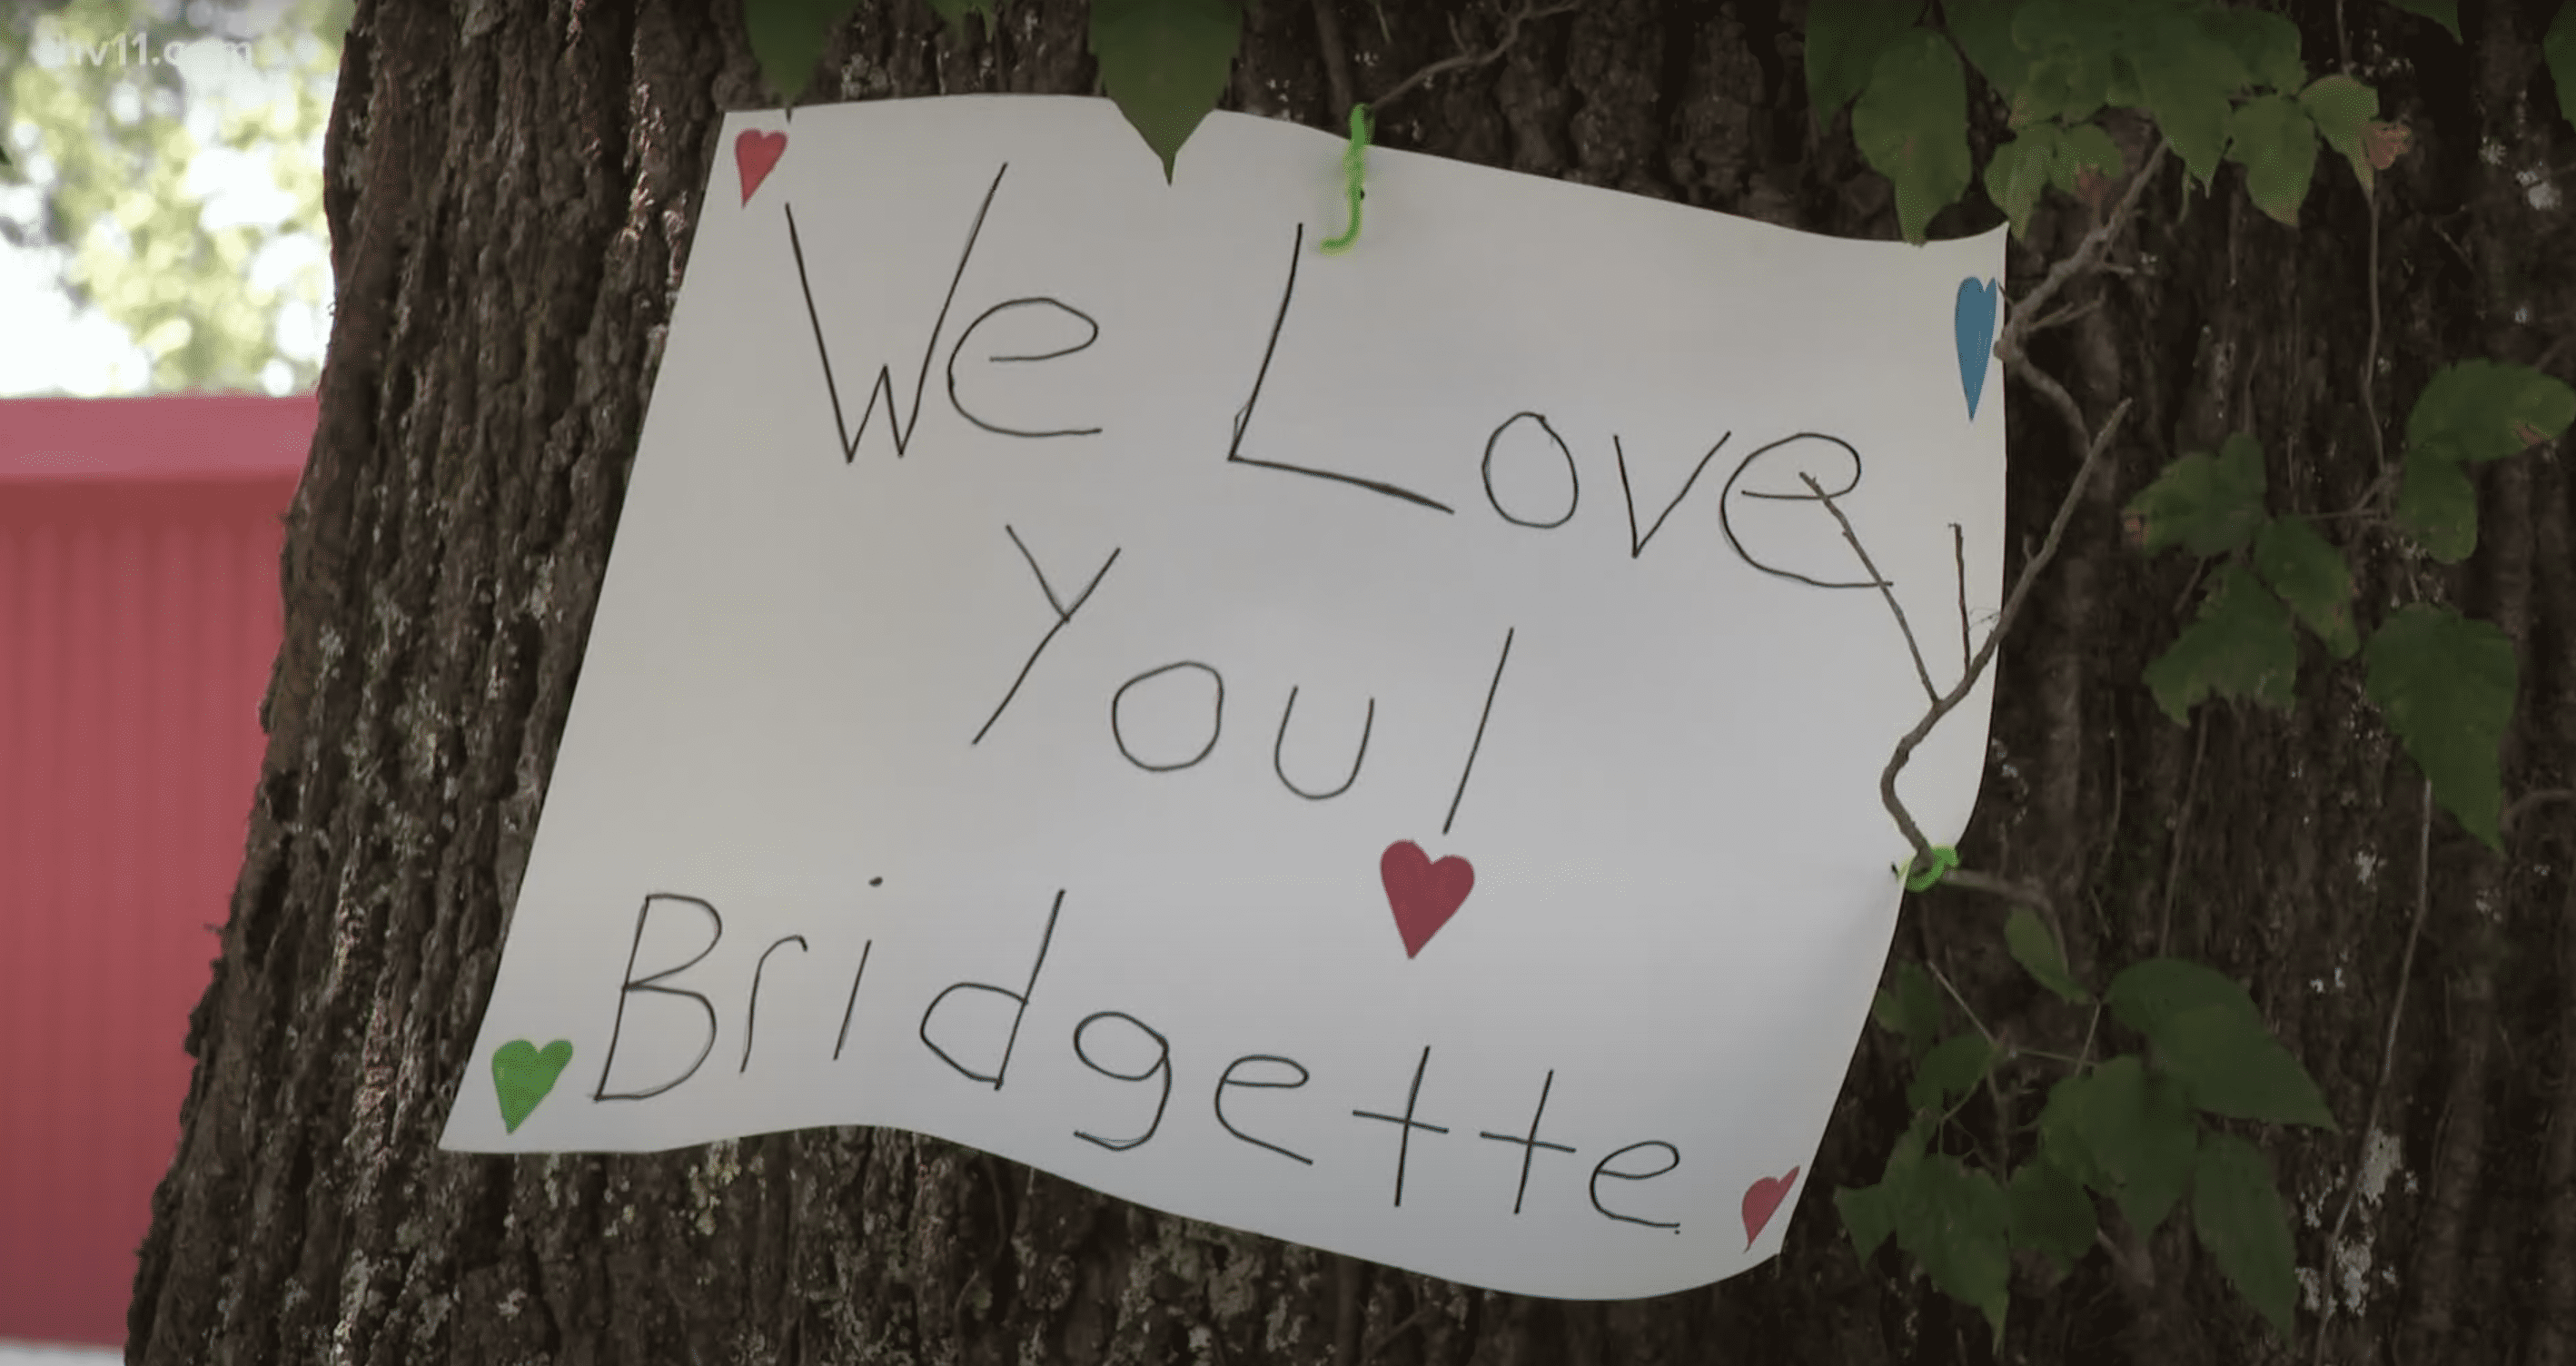 A touching note placed on a tree trunk for little Bridgette. | Source: YouTube.com/KARK 4 News